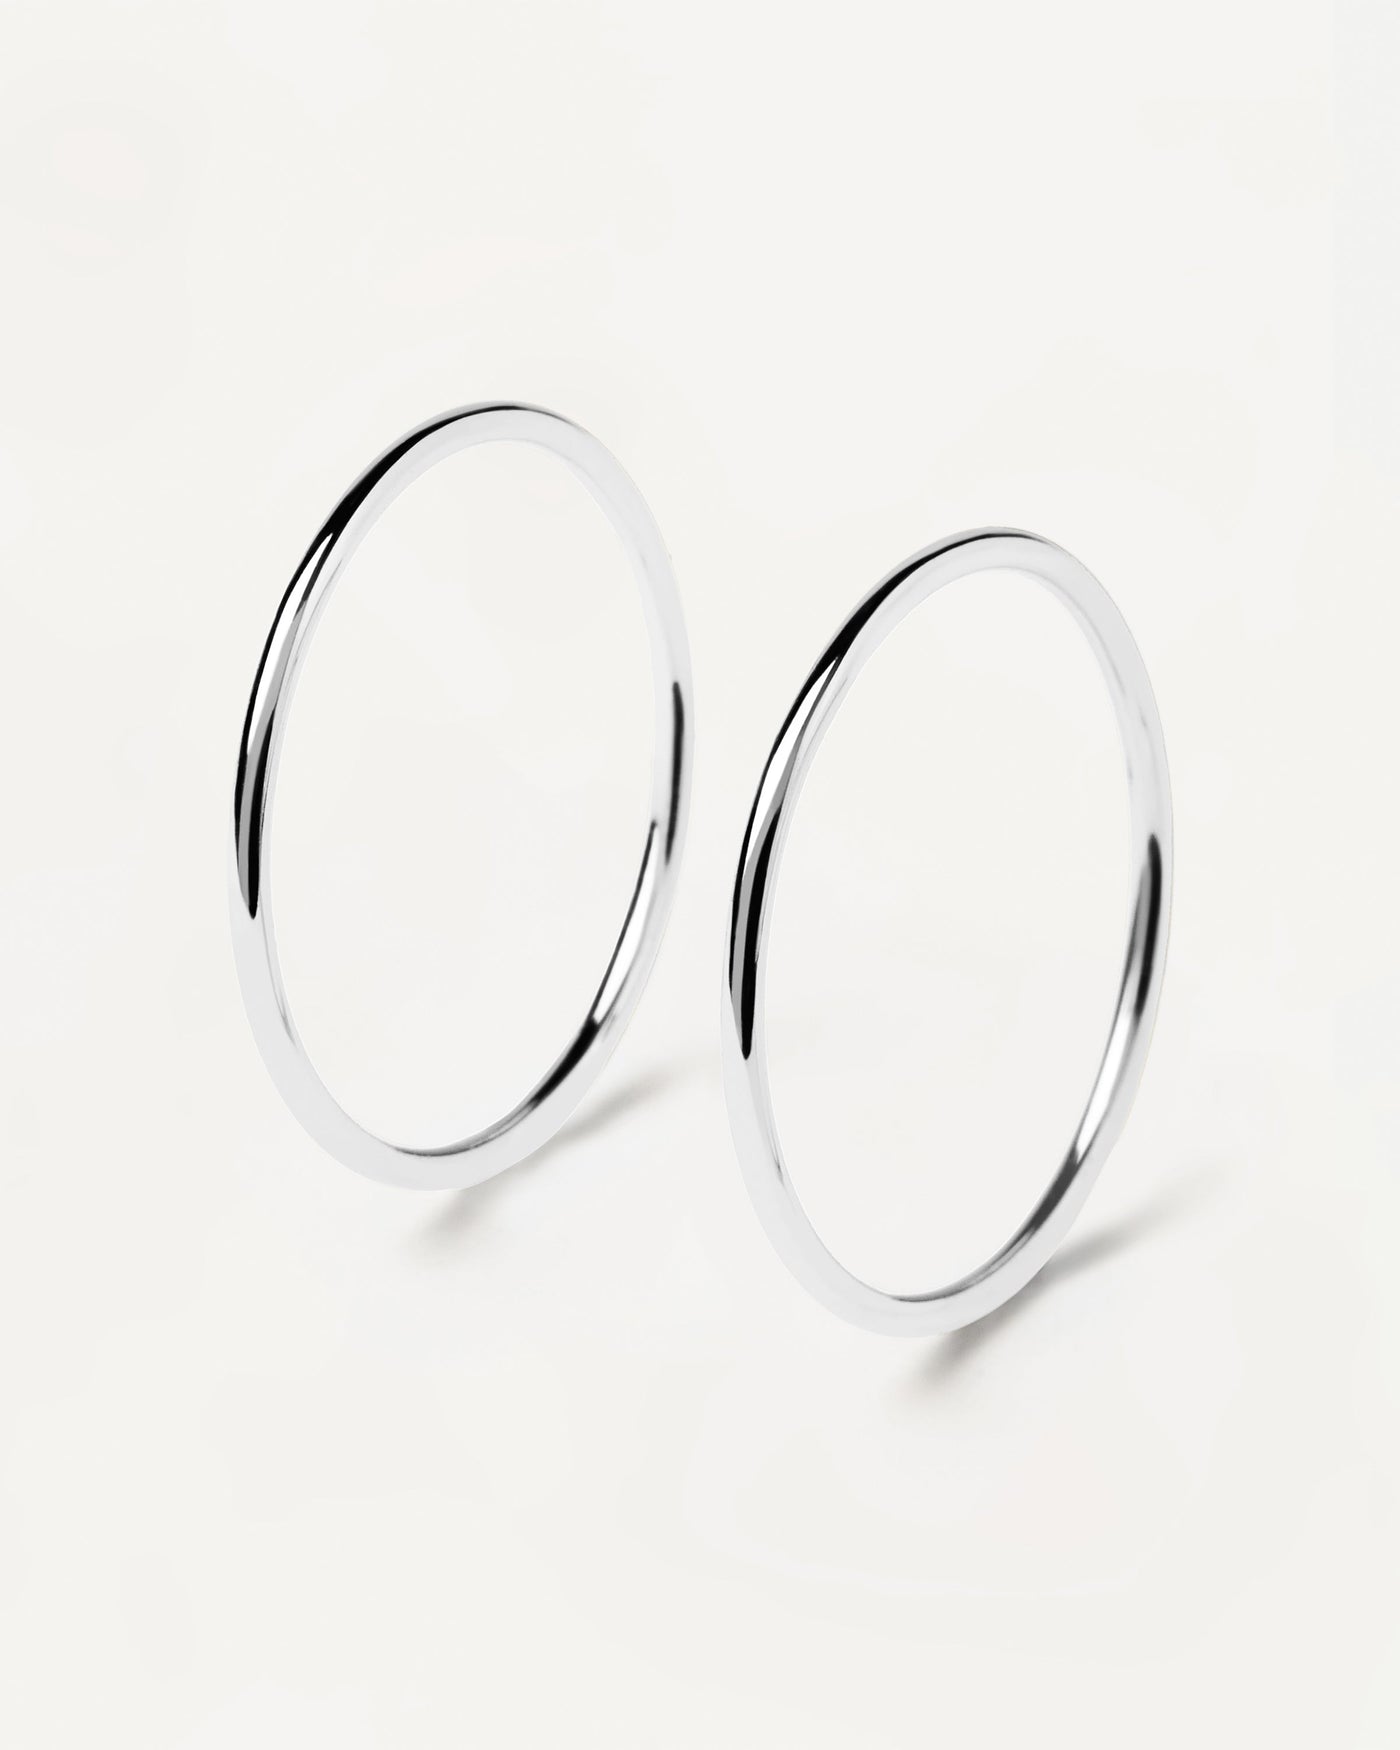 2023 Selection | Twin Silver Rings. Pair of stackable 925 sterling silver rings . Get the latest arrival from PDPAOLA. Place your order safely and get this Best Seller. Free Shipping.